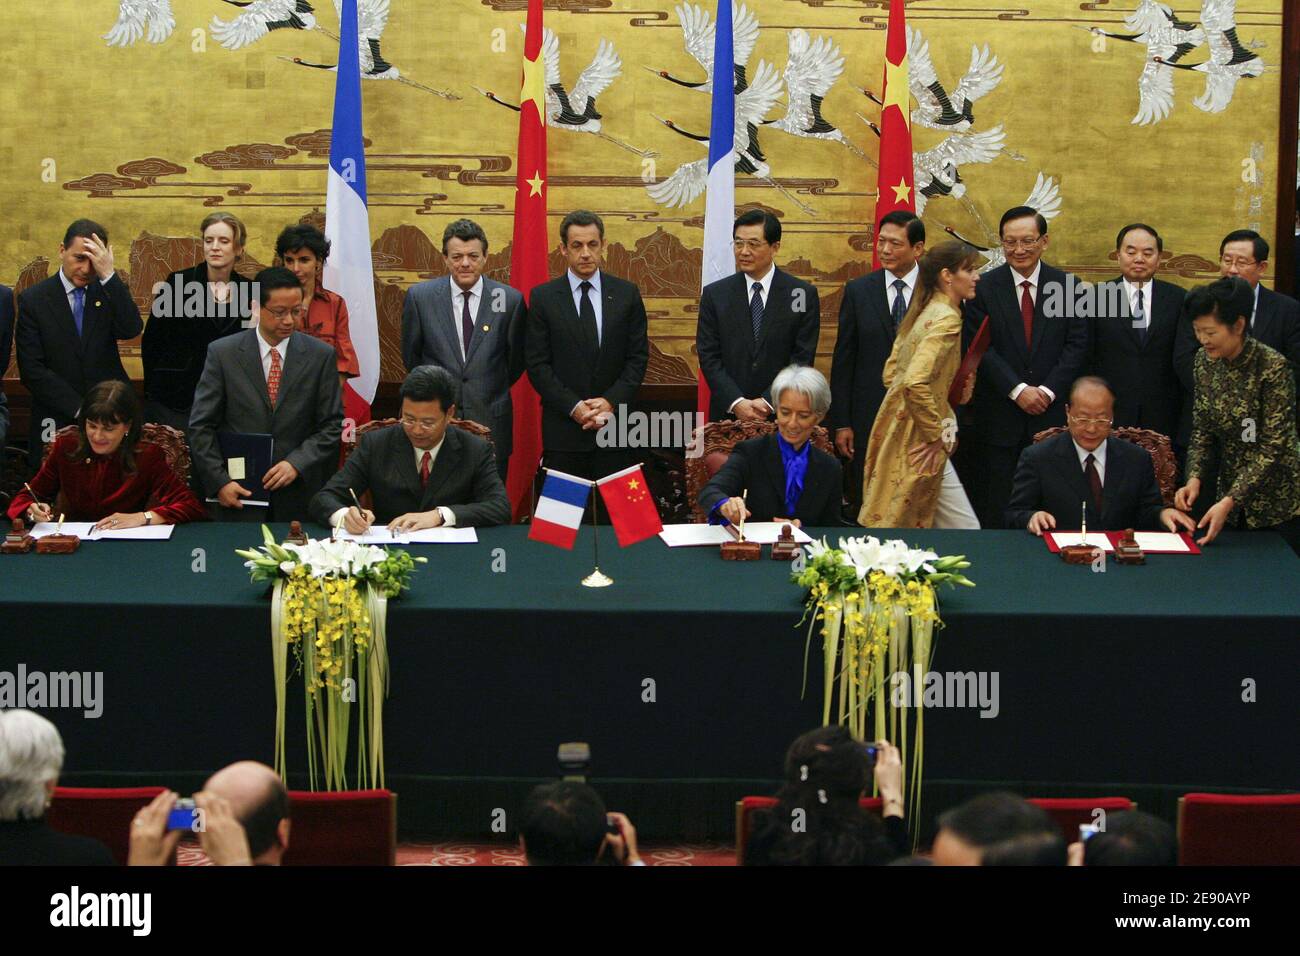 Areva CEO Anne Lauvergeon (L) and French Minister for the Economy, Finance and Employment Christine Lagarde (R) attend a signing ceremony with Chinese President Hu Jintao (2nd row R) and his French counterpart Nicolas Sarkozy (2nd row C) and members of the French government at the 'Great Hall of People' during a 3-Day state visit in Beijing, China, on November 26, 2007. Sarkozy has overseen the signing of about 30 billion dollars in aviation, nuclear and other deals in what he described as an unprecedented day of trade with China. Photo by Patrick Durand/ABACAPRESS.COM Stock Photo